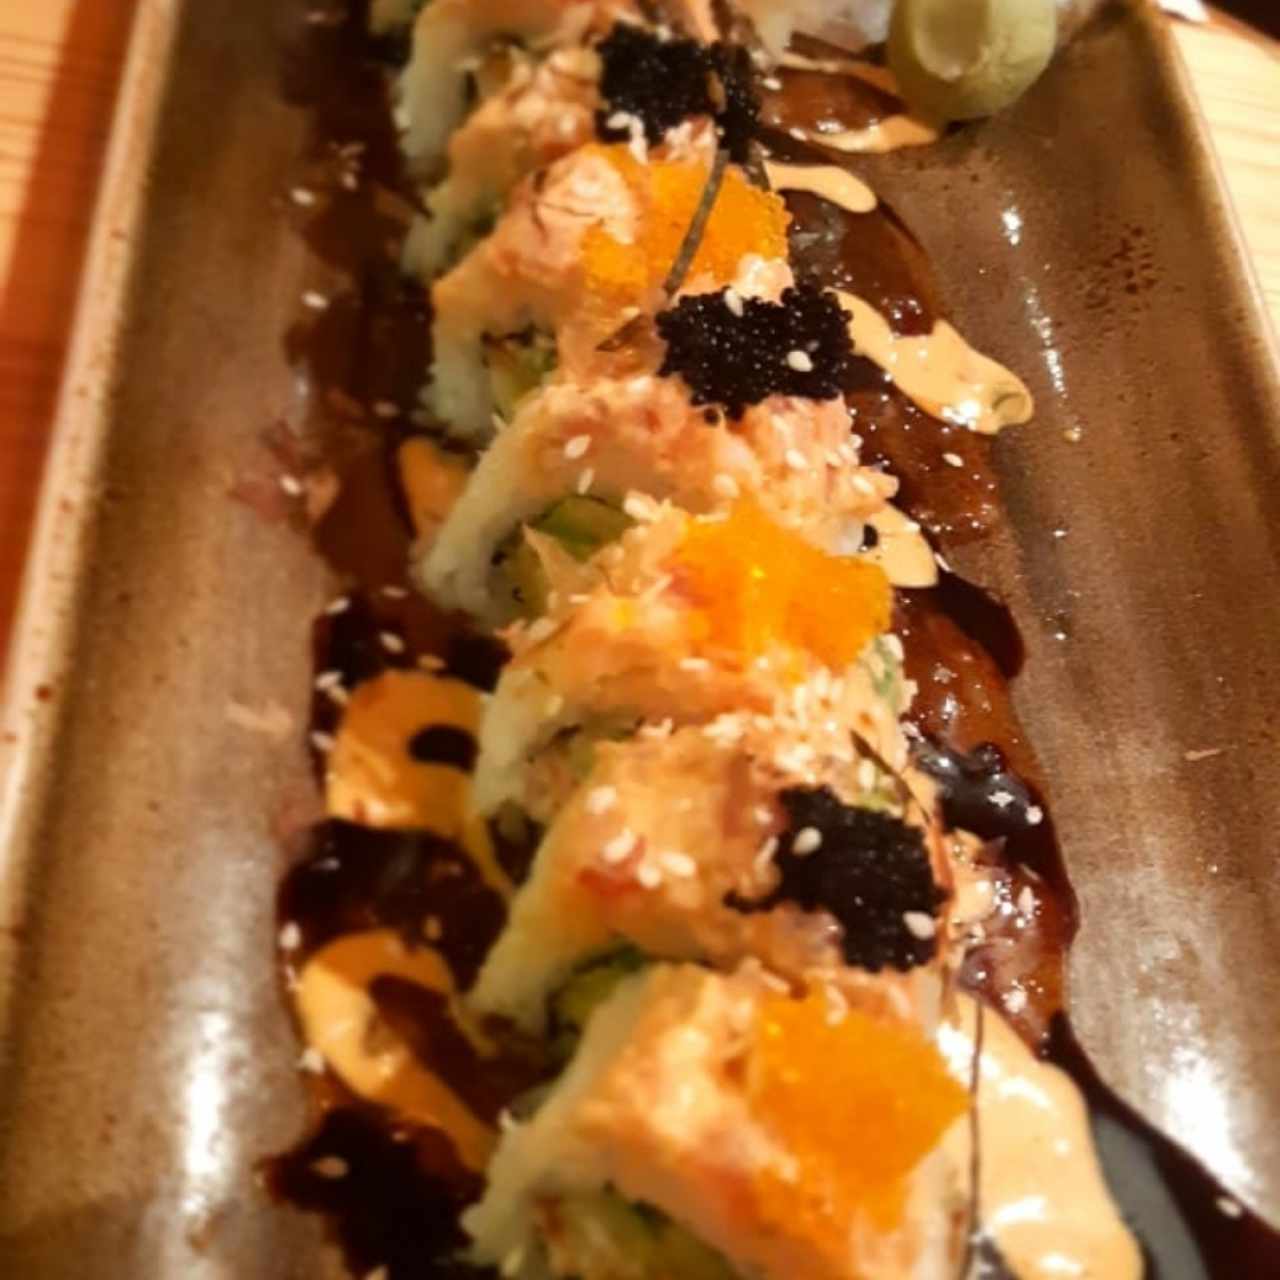 Chang's Roll